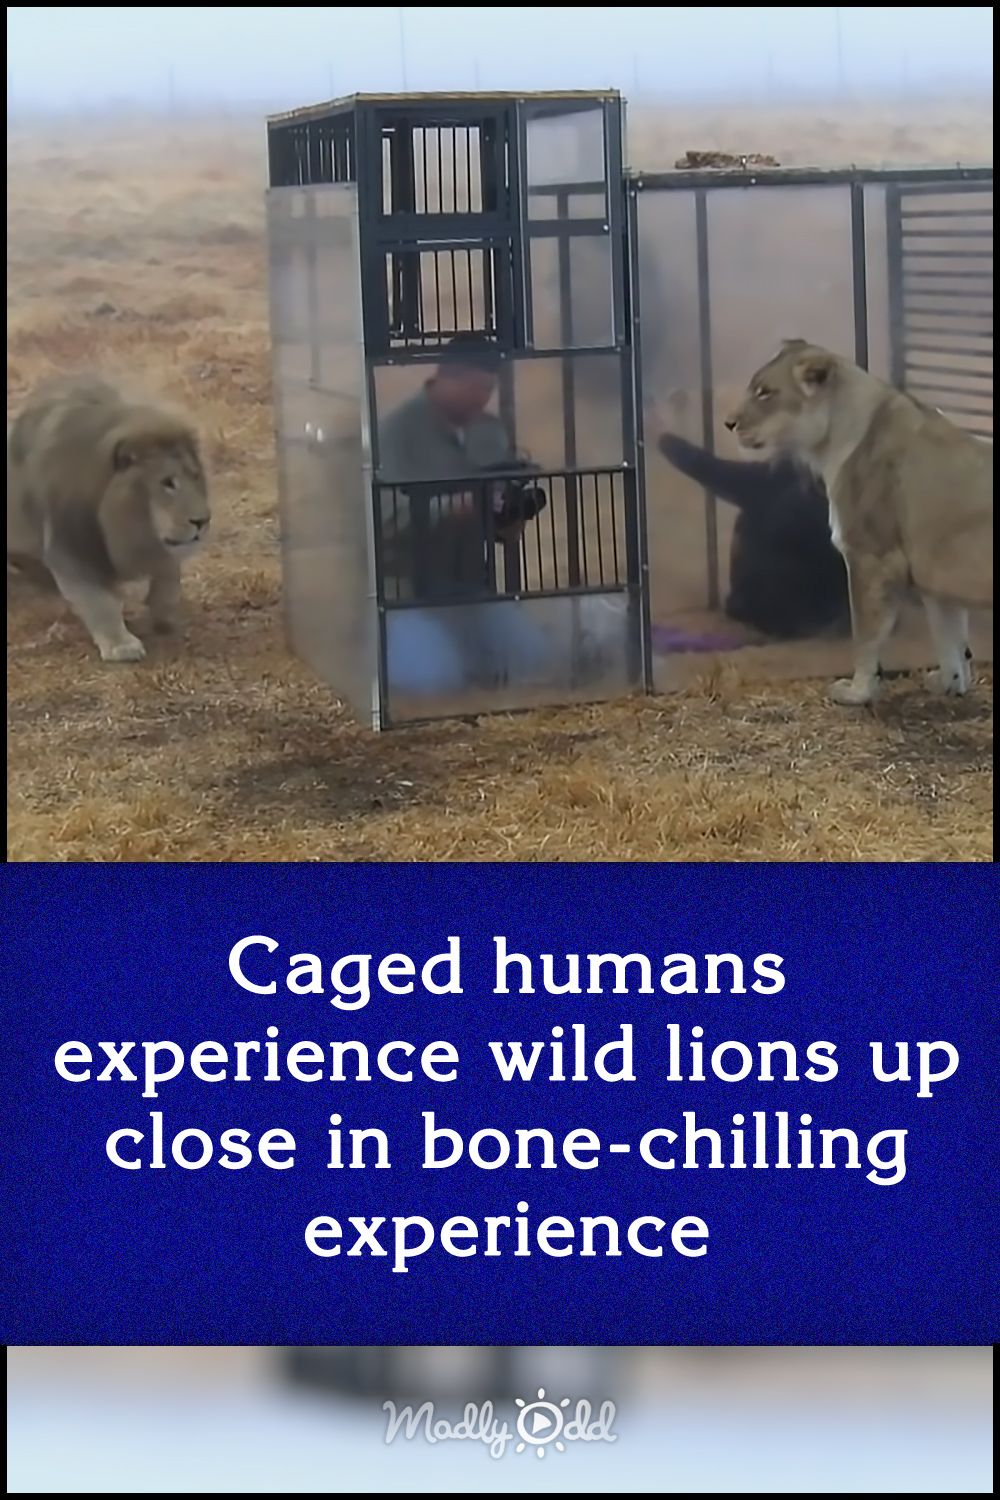 Caged humans experience wild lions up close in bone-chilling experience